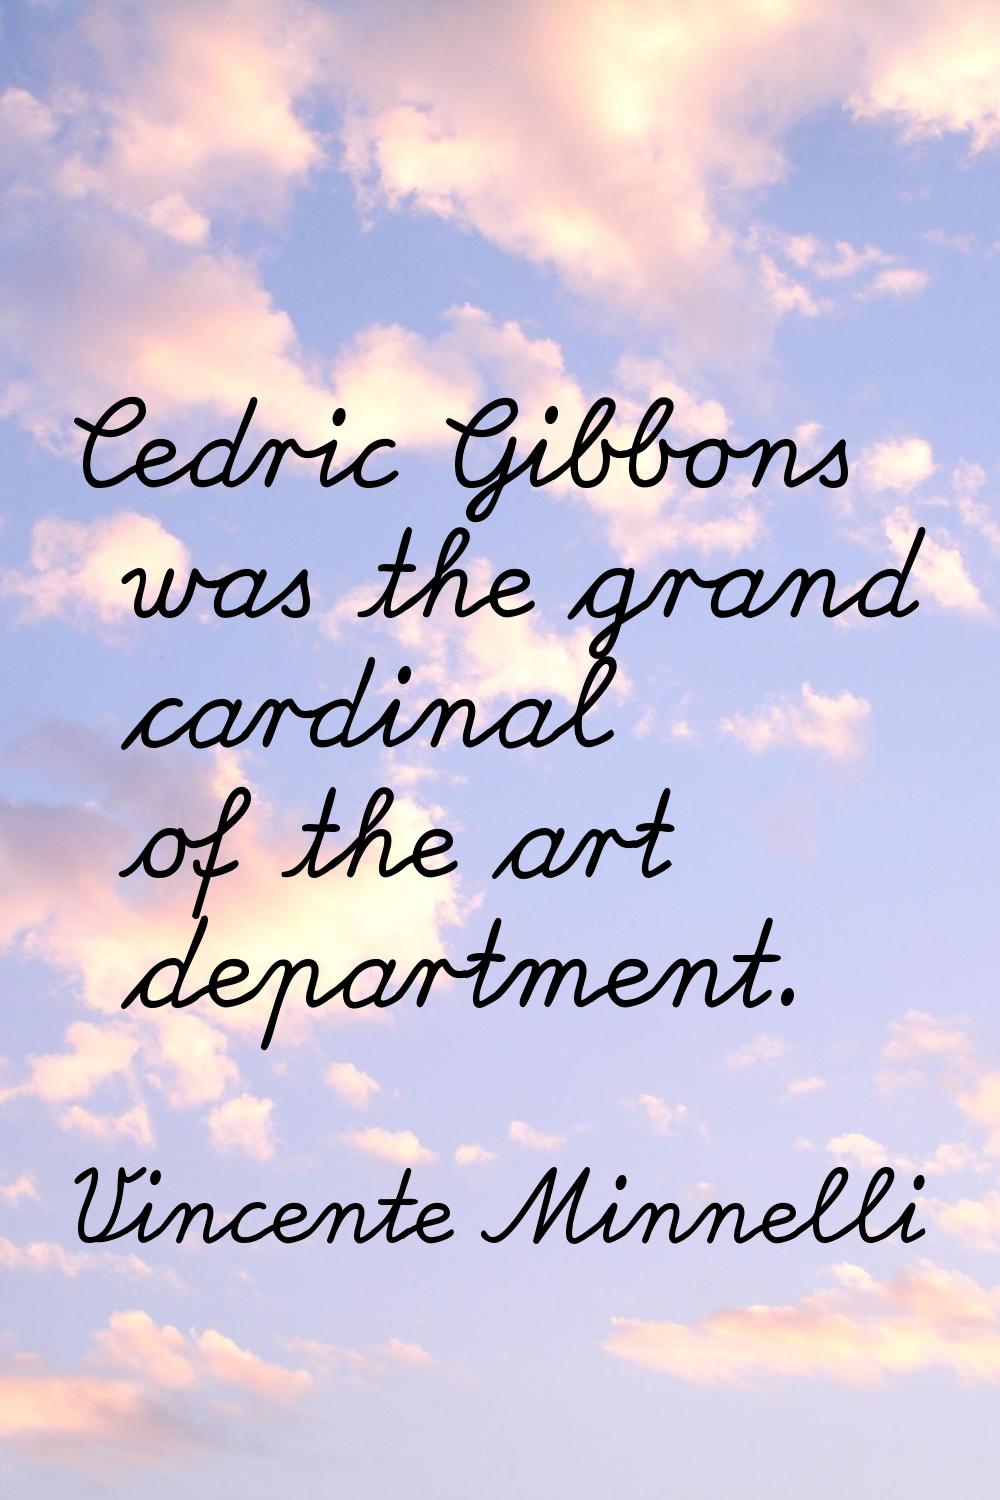 Cedric Gibbons was the grand cardinal of the art department.